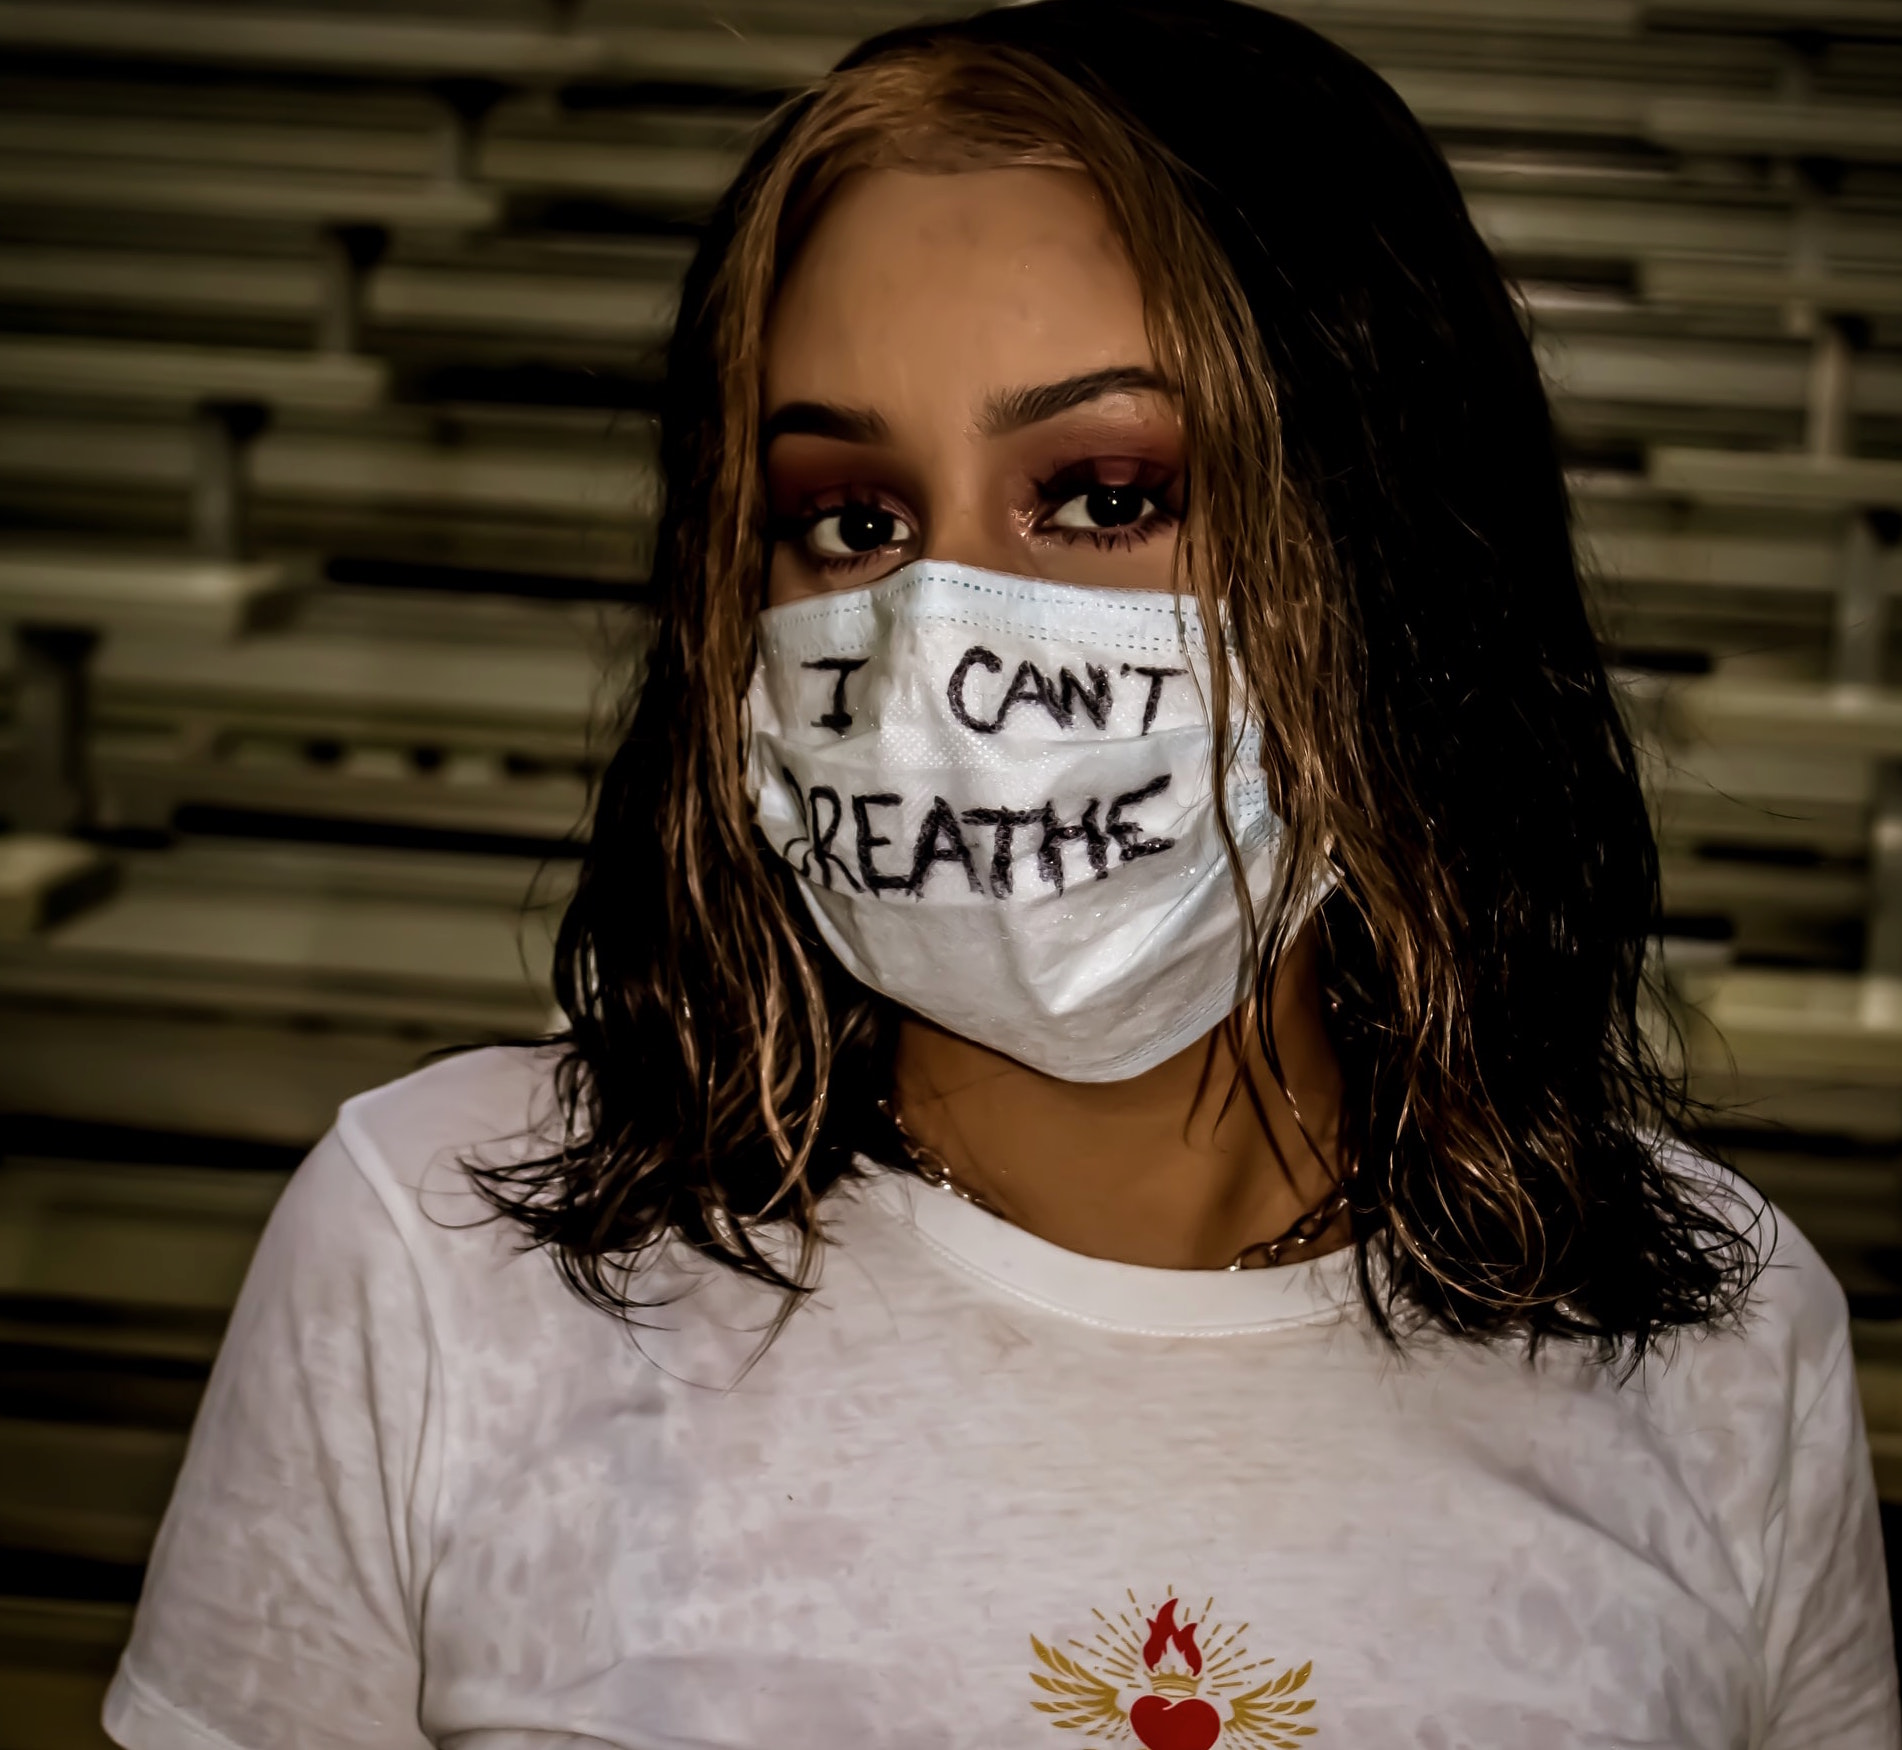 Person wearing mask with words "I can't breathe." Image credit: David Ramos/Unsplash